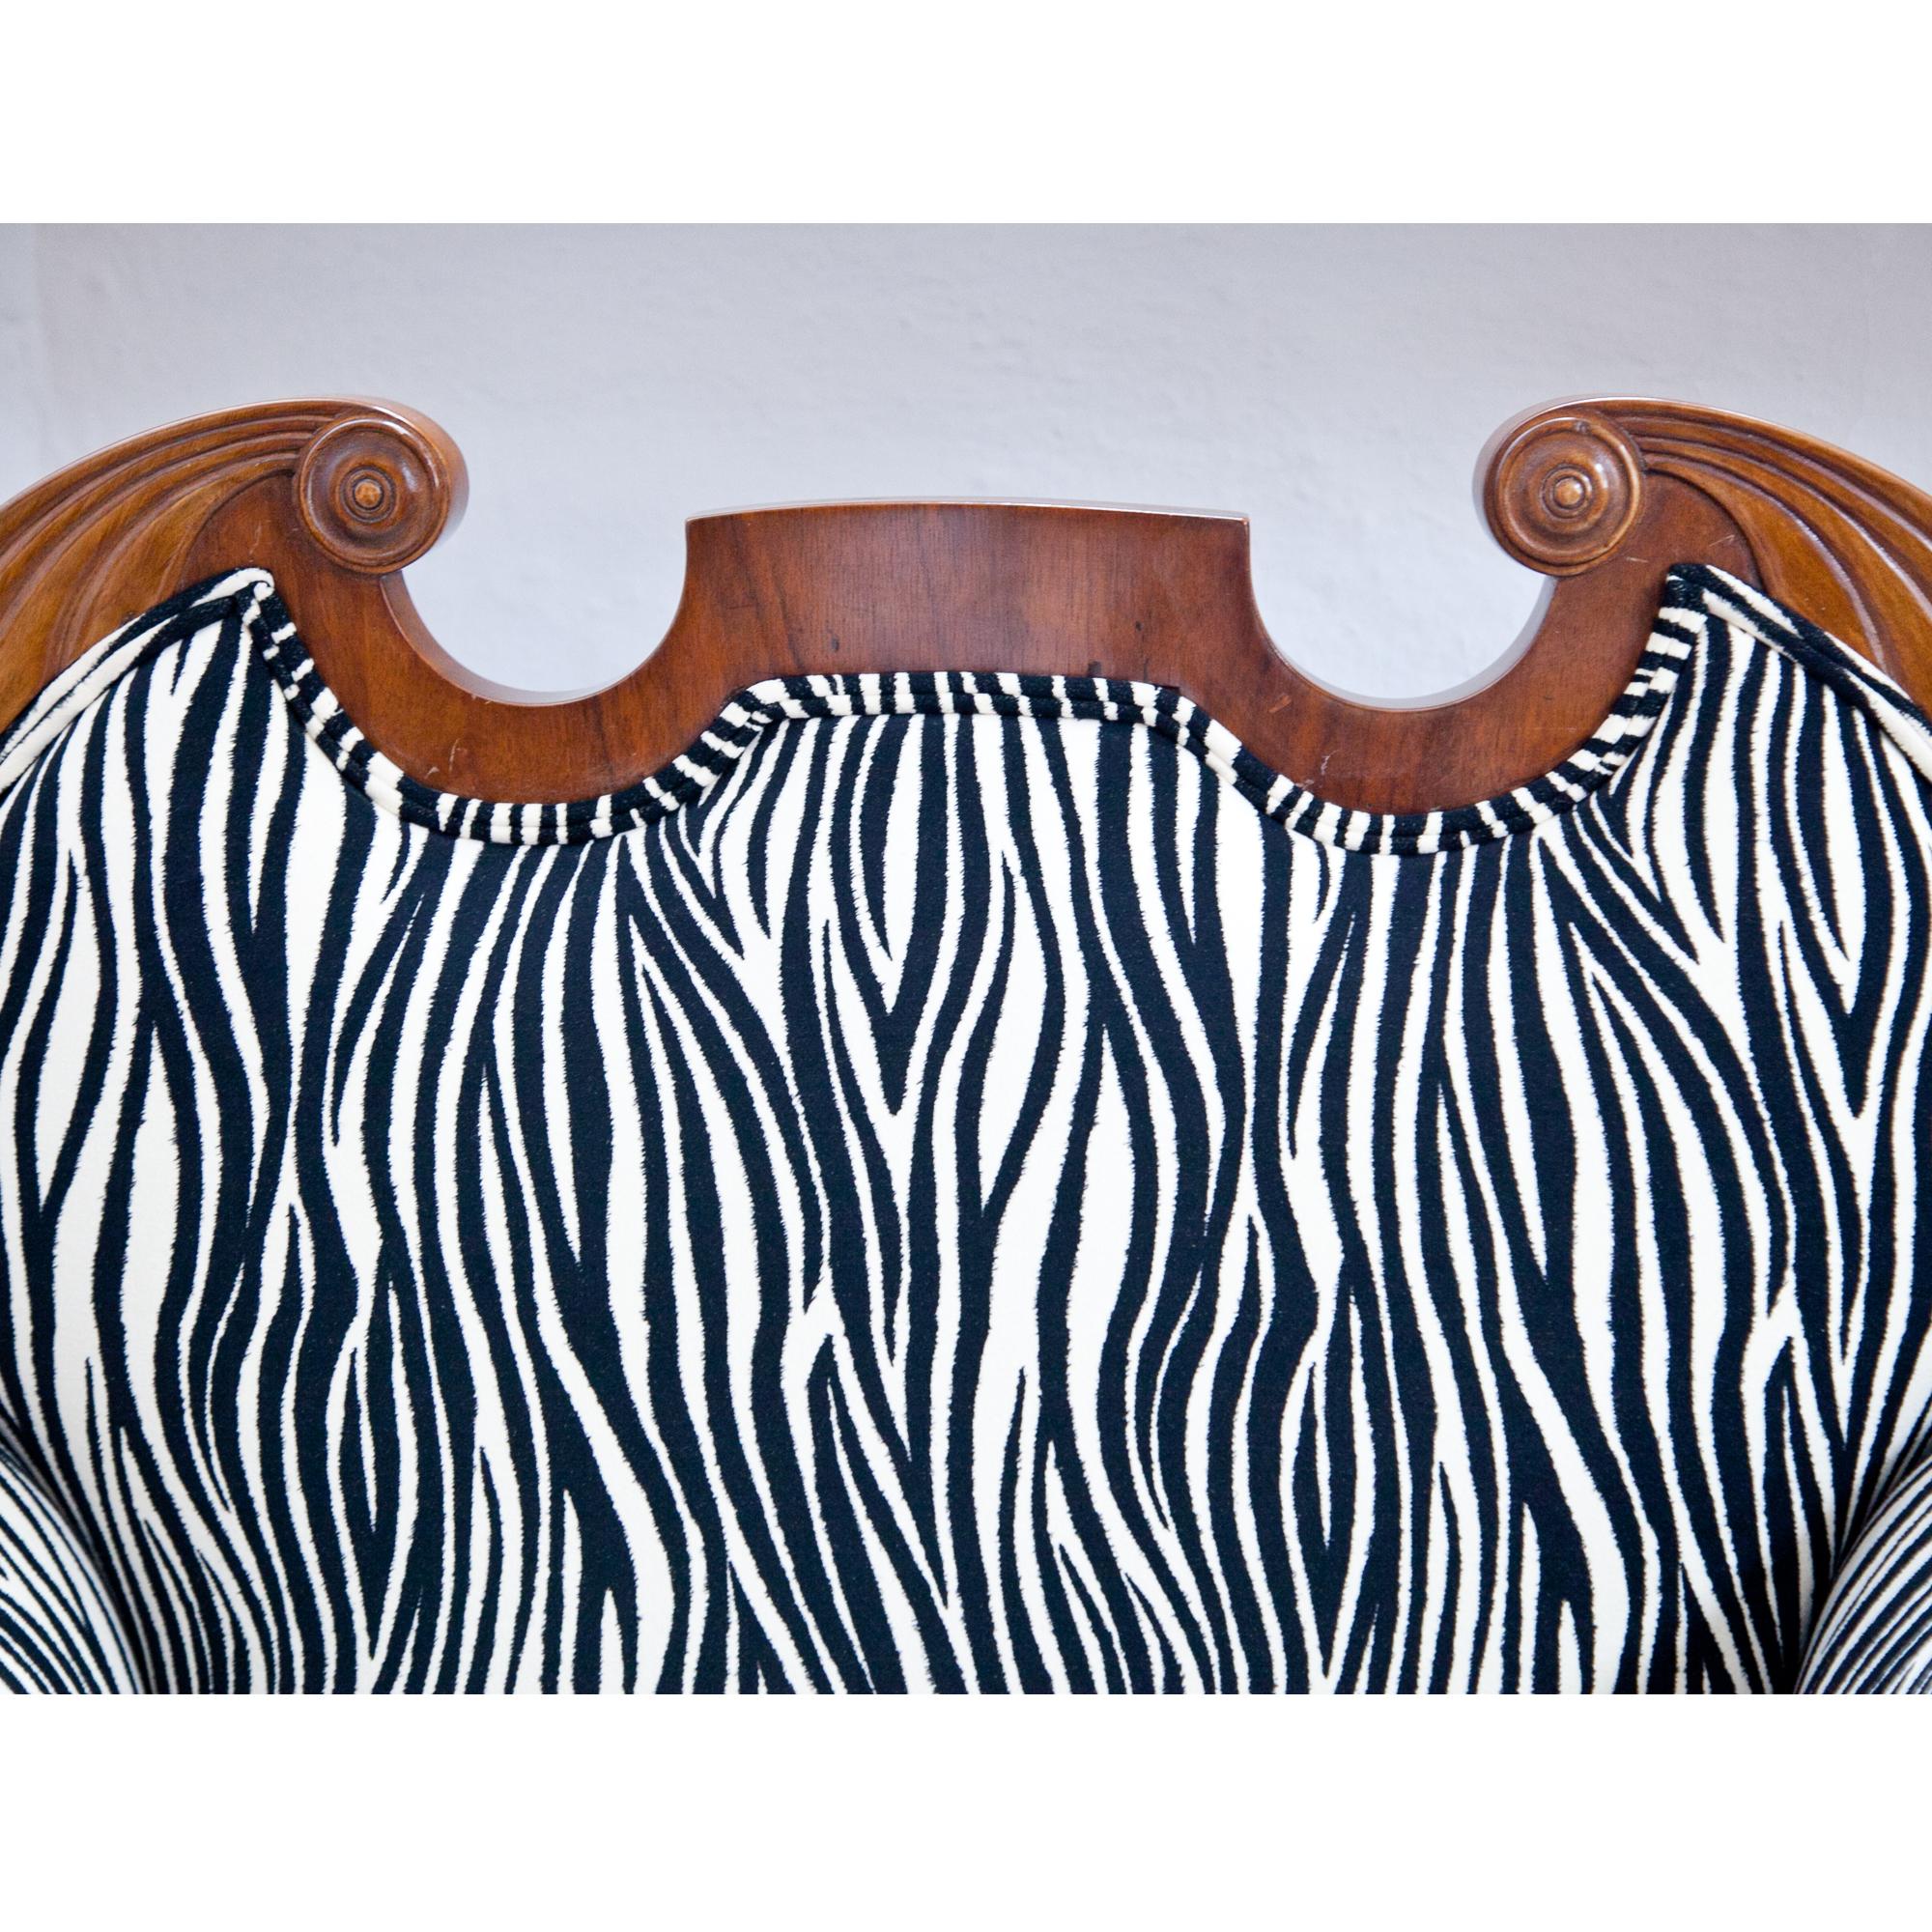 Pair of Biedermeier armchairs, standing on scrolled feet. The armchairs are upholstered with a modern zebra-patterned fabric. The backrests are in the shape of a swan's neck pediment.